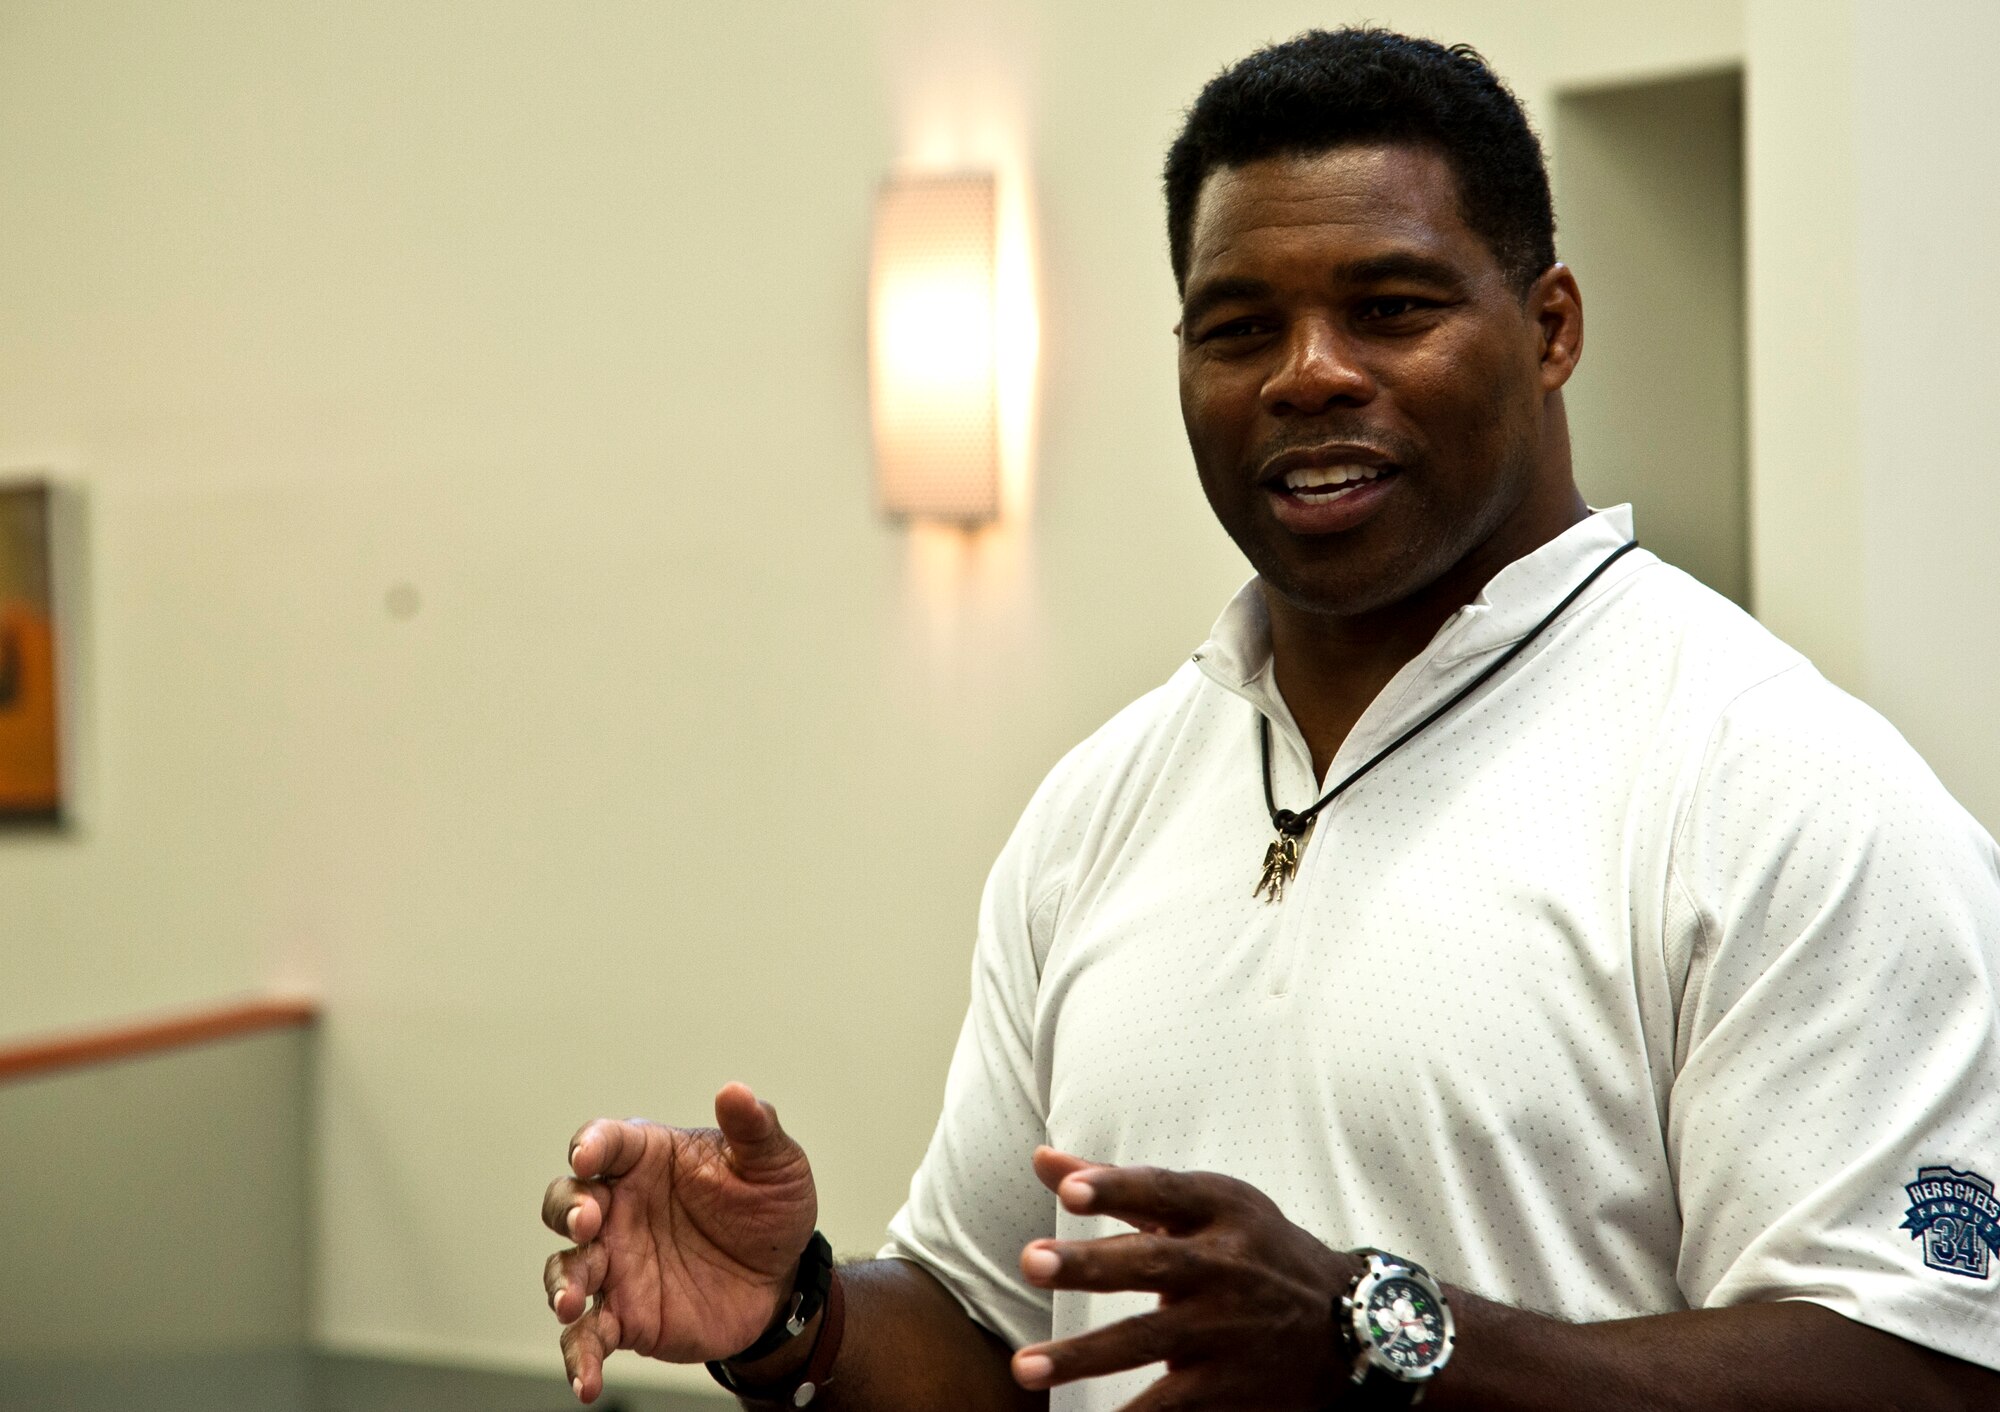 Herschel Walker talks about how he struggled and learned to deal with Dissociative Identity Disorder during a breakfast May 21, 2014, at Whiteman Air Force Base, Missouri. Walker wrote a book about his struggle titled “Breaking Free, My Life with Dissociative Identity Disorder.” (U.S. Air Force photo by Senior Airman Daniel Phelps/Released))